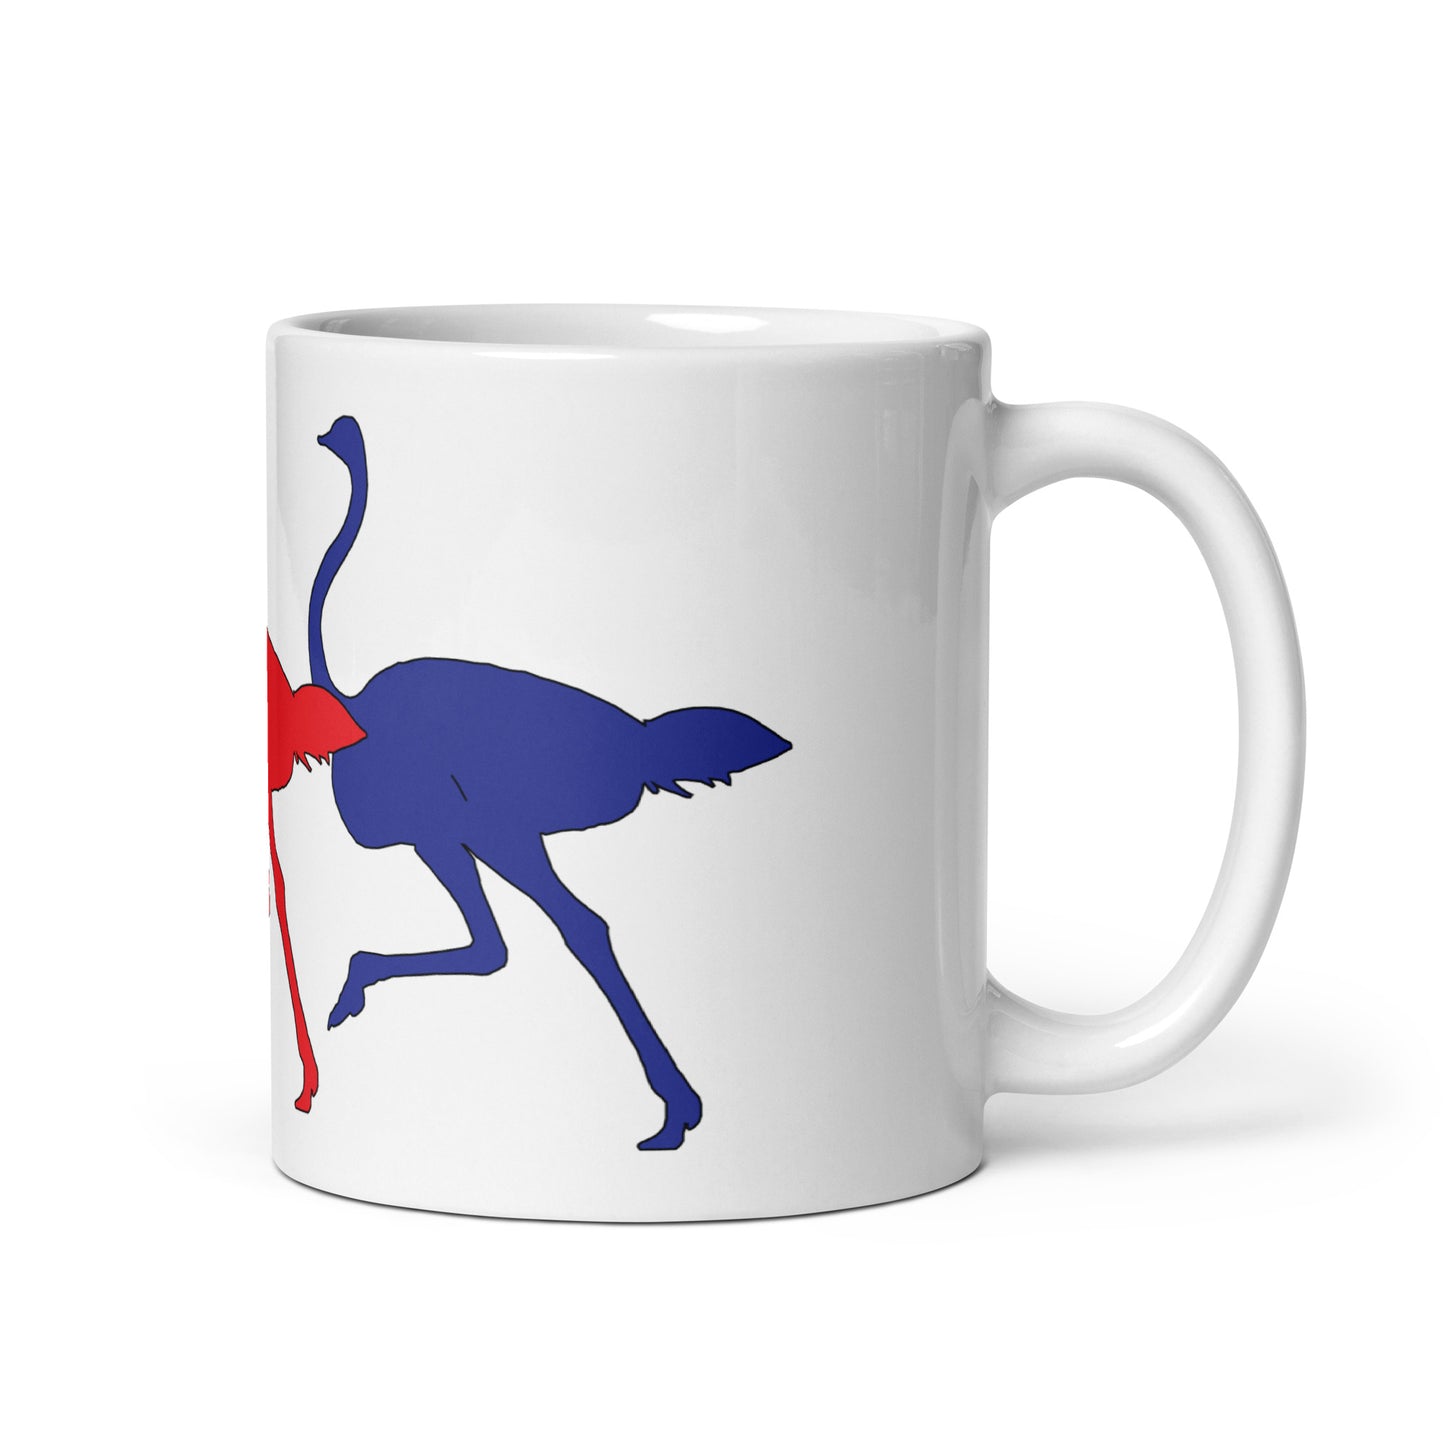 Glossy Mug printed with Colourful Running Ostriches.